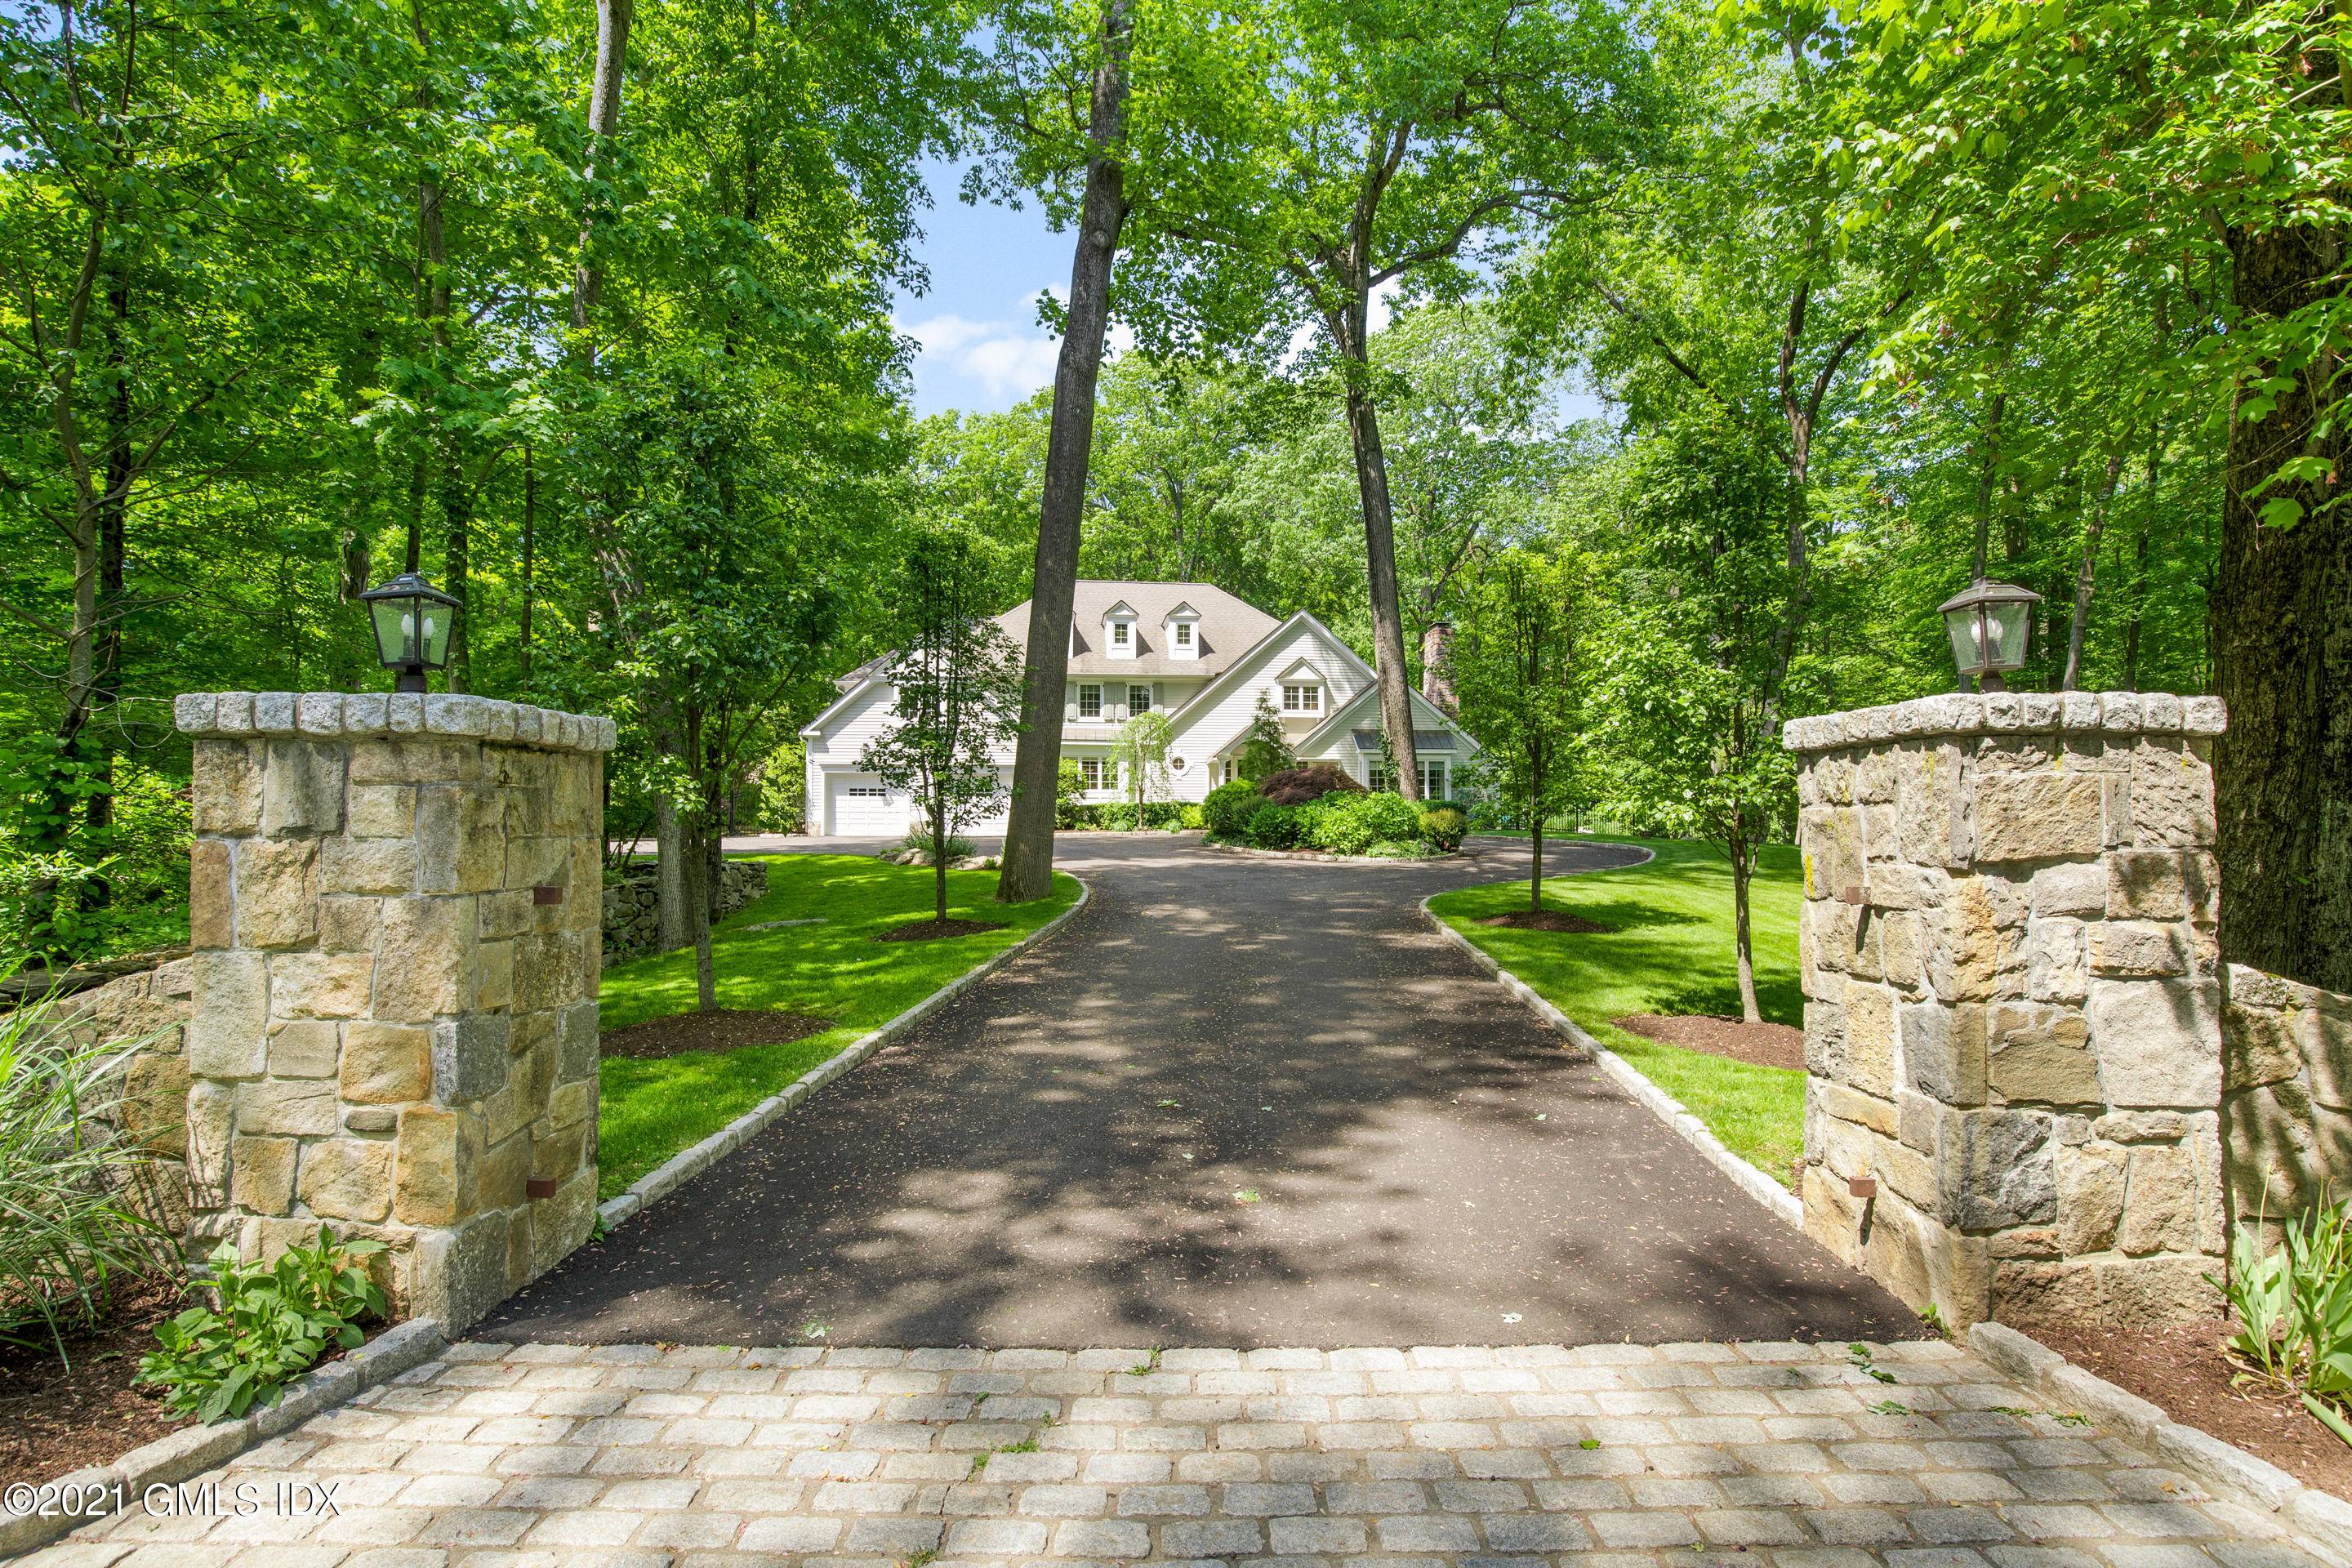 At the end of a quiet cul de sac and stately driveway with stone pillars, sits an inviting country home on four verdant acres.